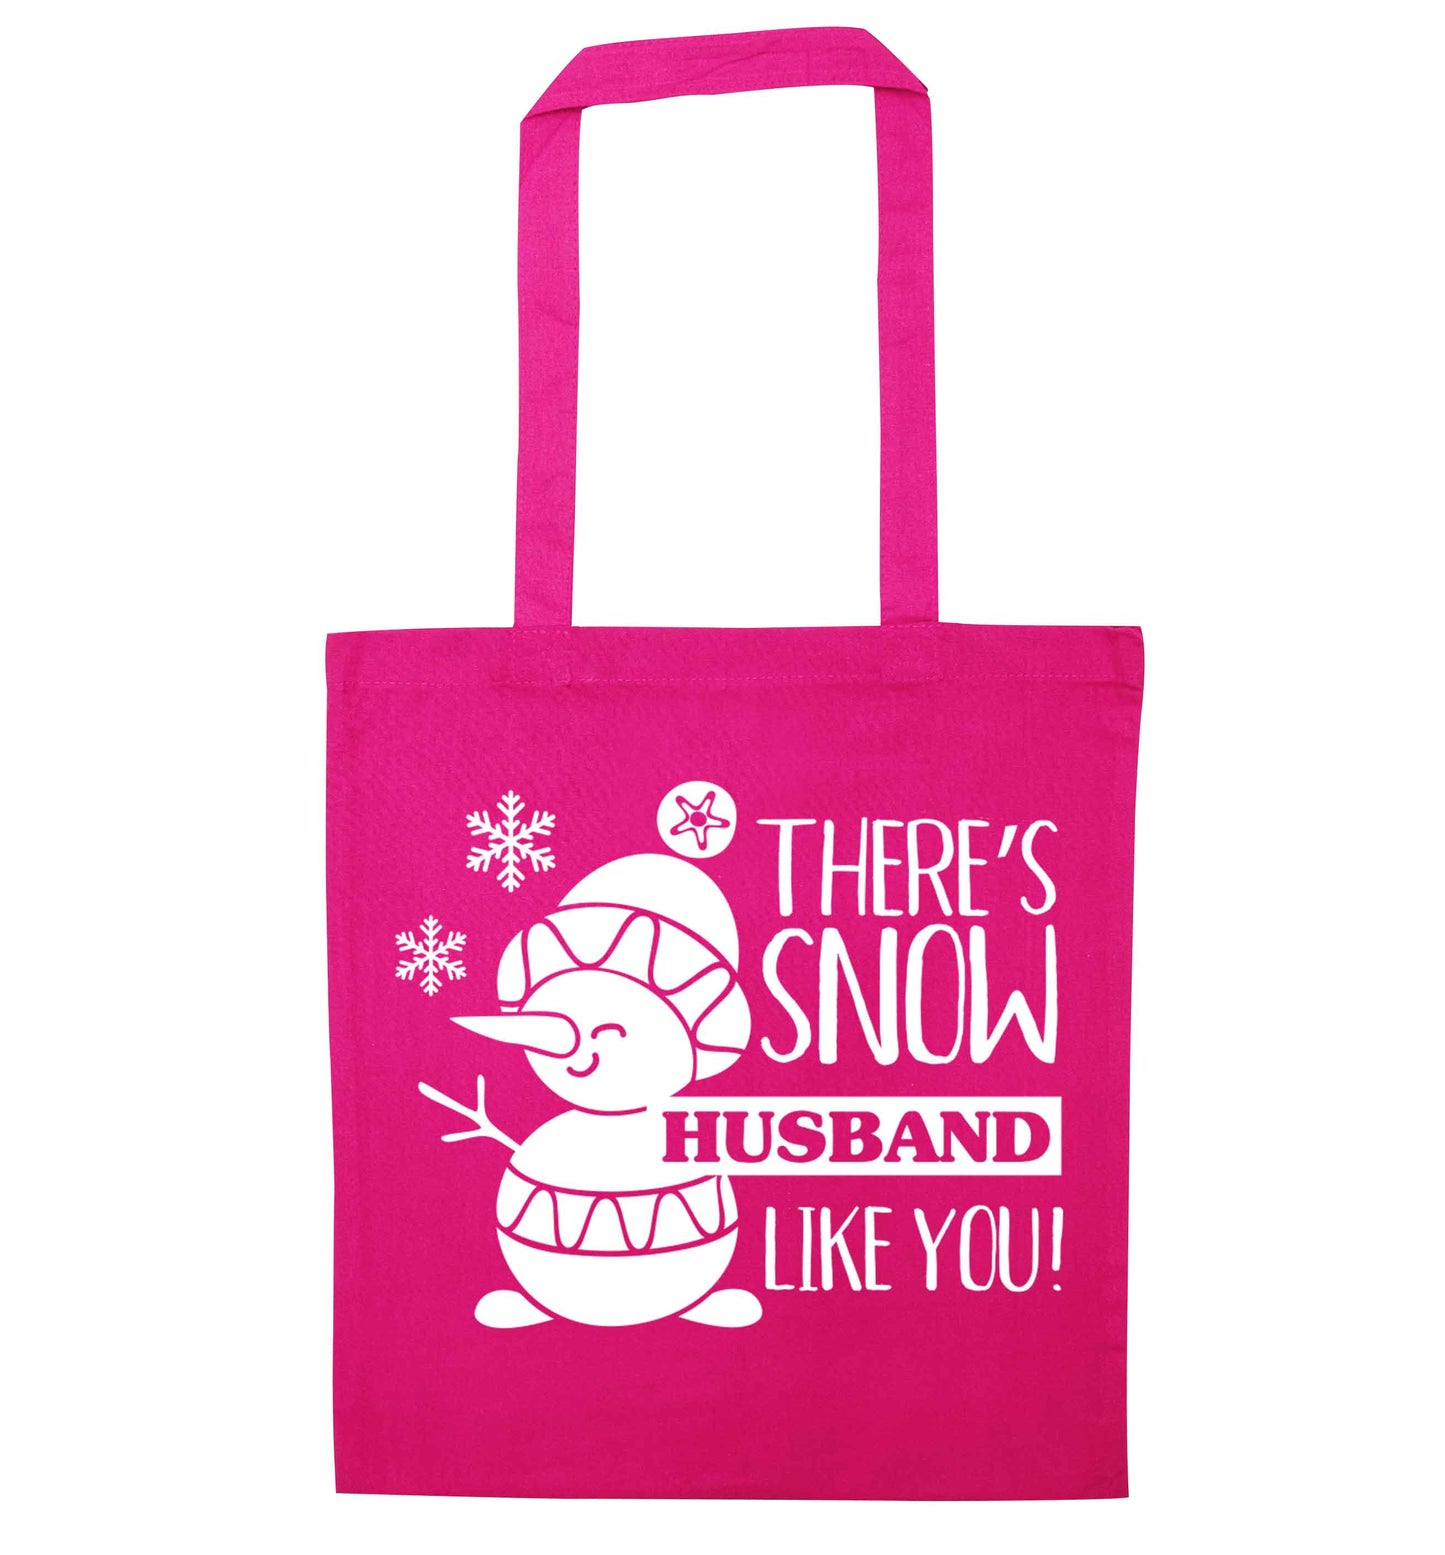 There's snow husband like you pink tote bag